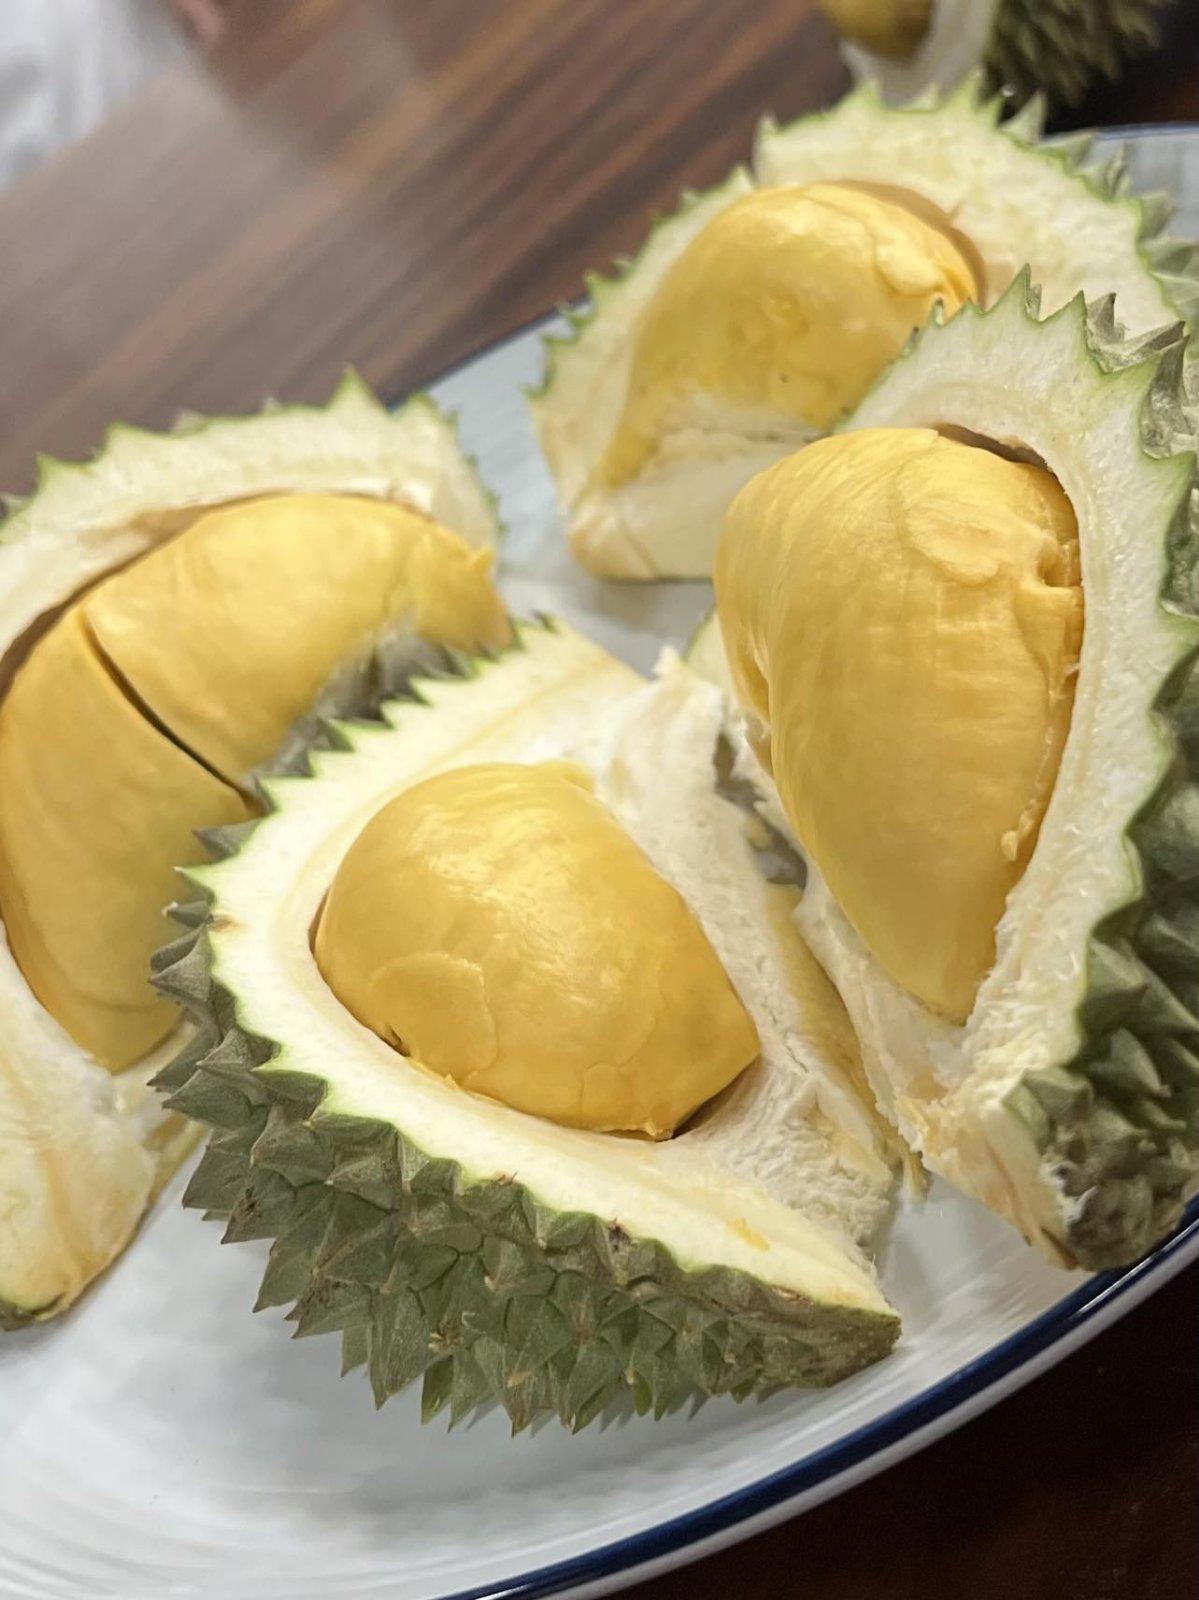 A plate of durian fruit  Description automatically generated